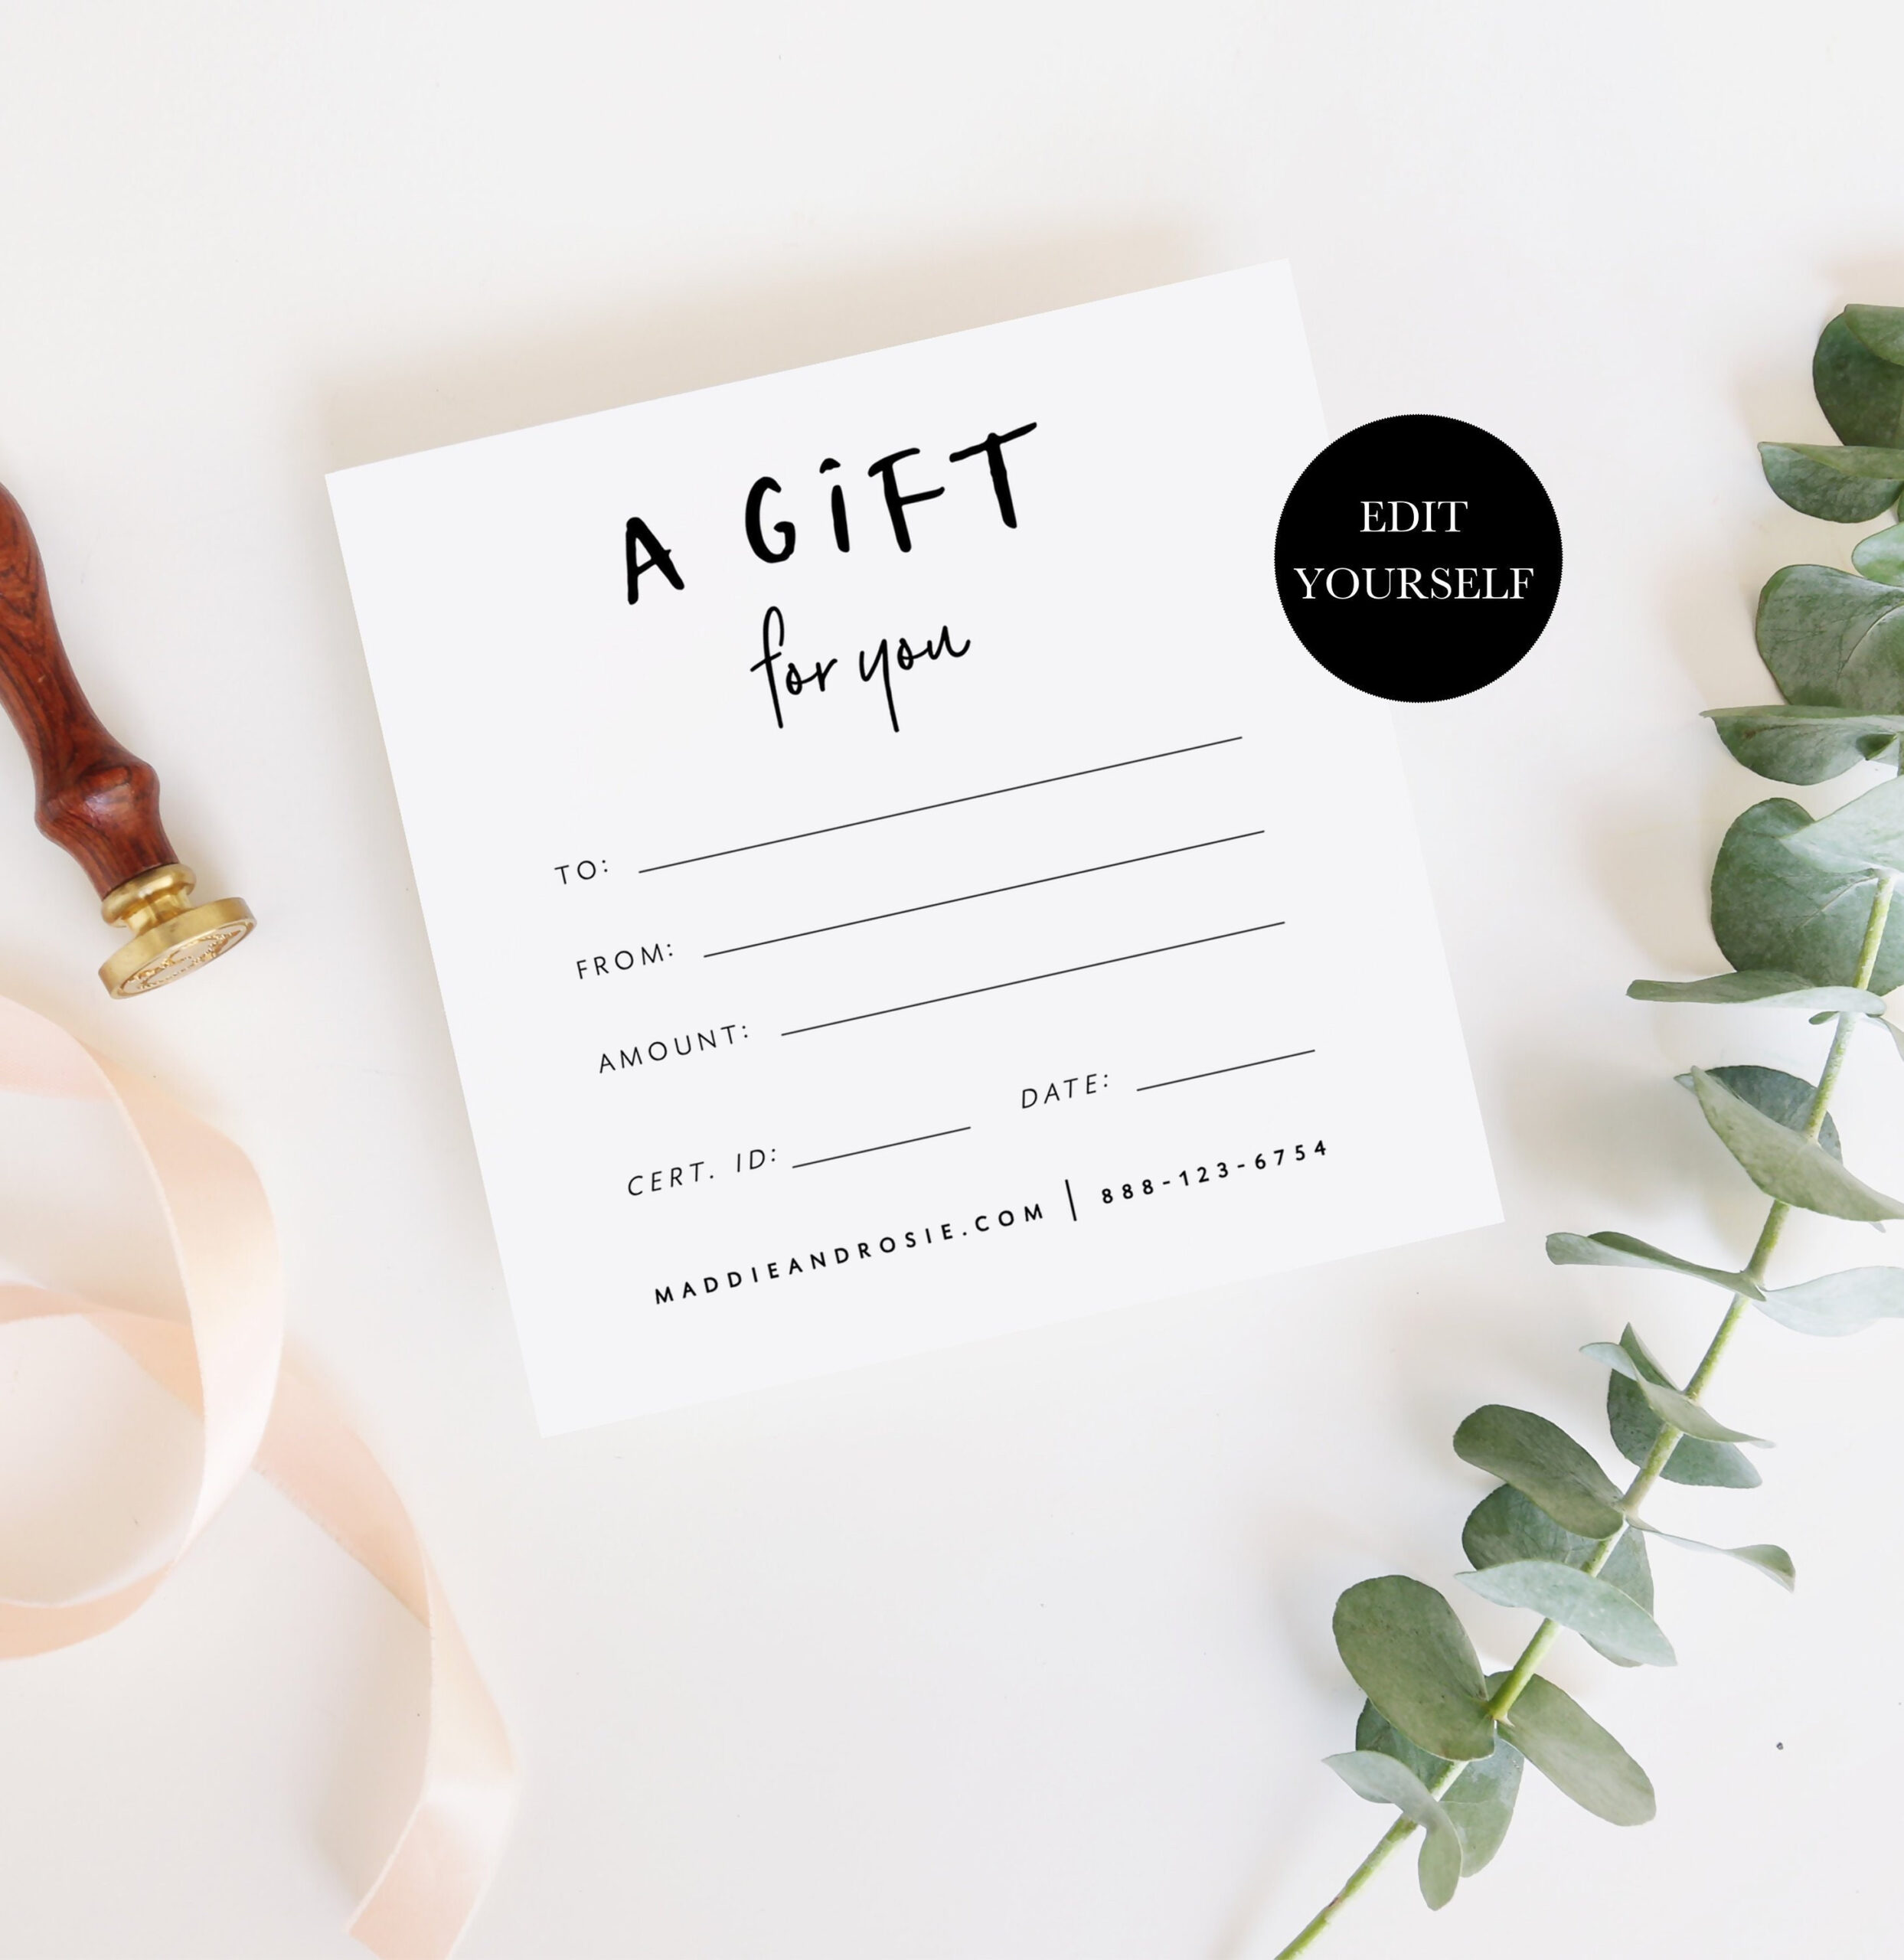 Gift Voucher Template Printable Voucher Download Editable – Etsy  With Homemade Gift Certificate Template